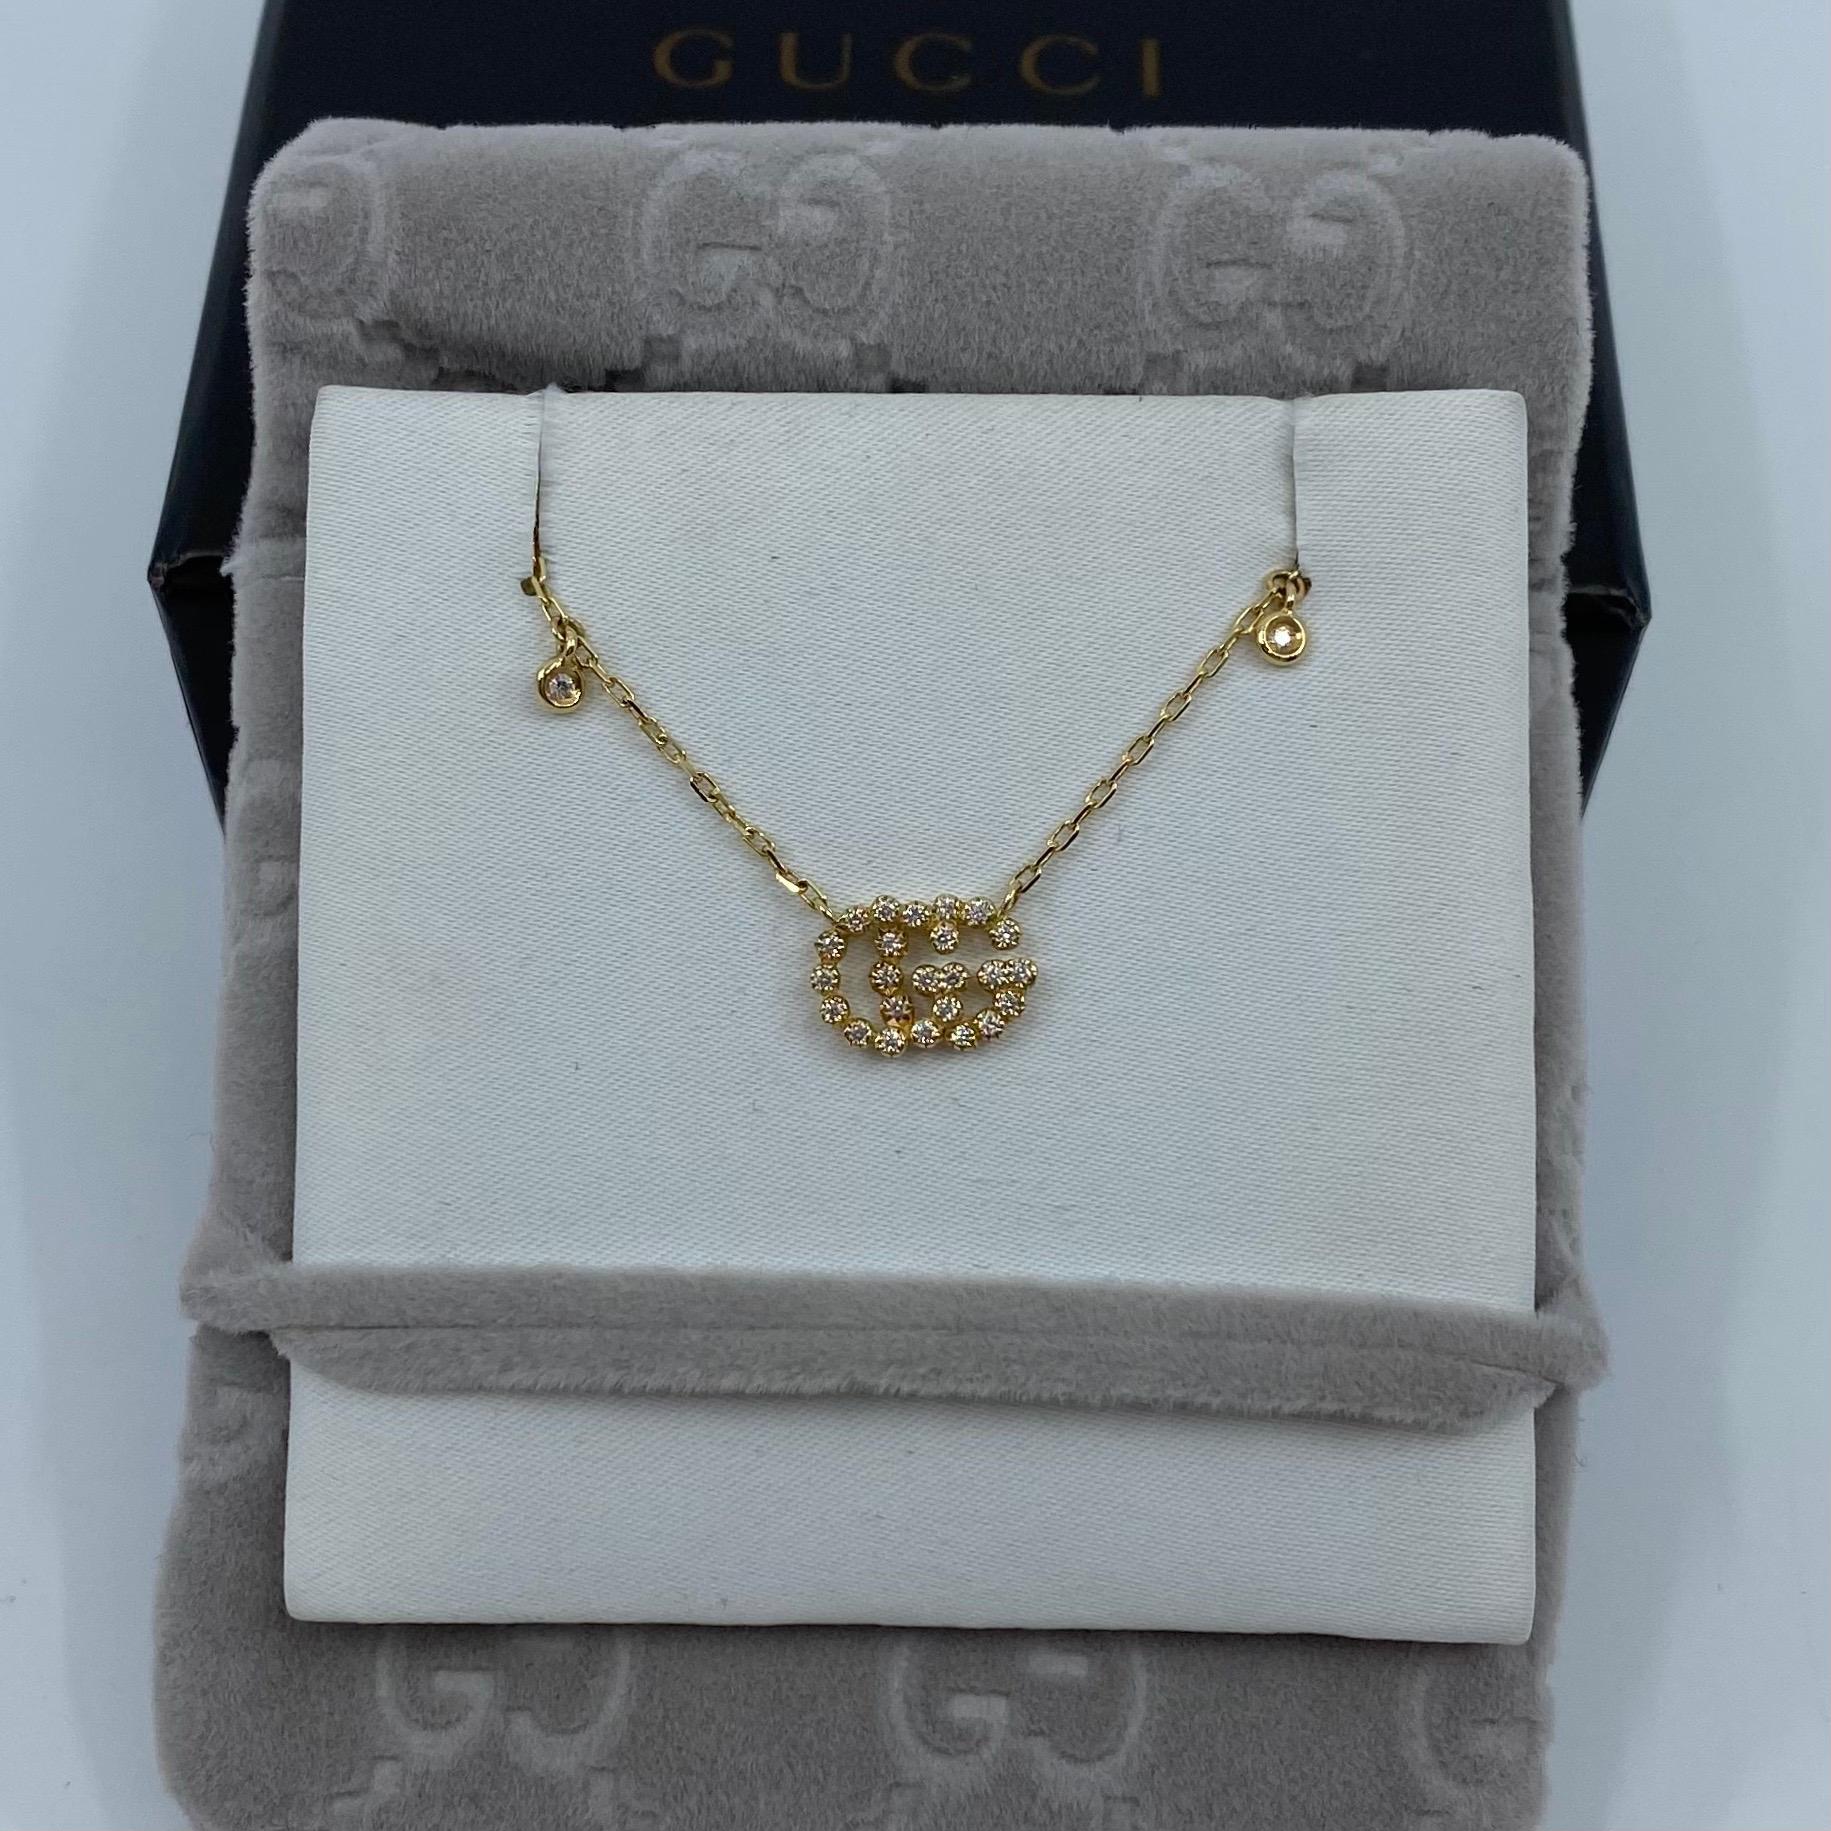 Brand New with Tags Gucci GG Logo Running Diamond Necklace 18 Karat Yellow Gold 1